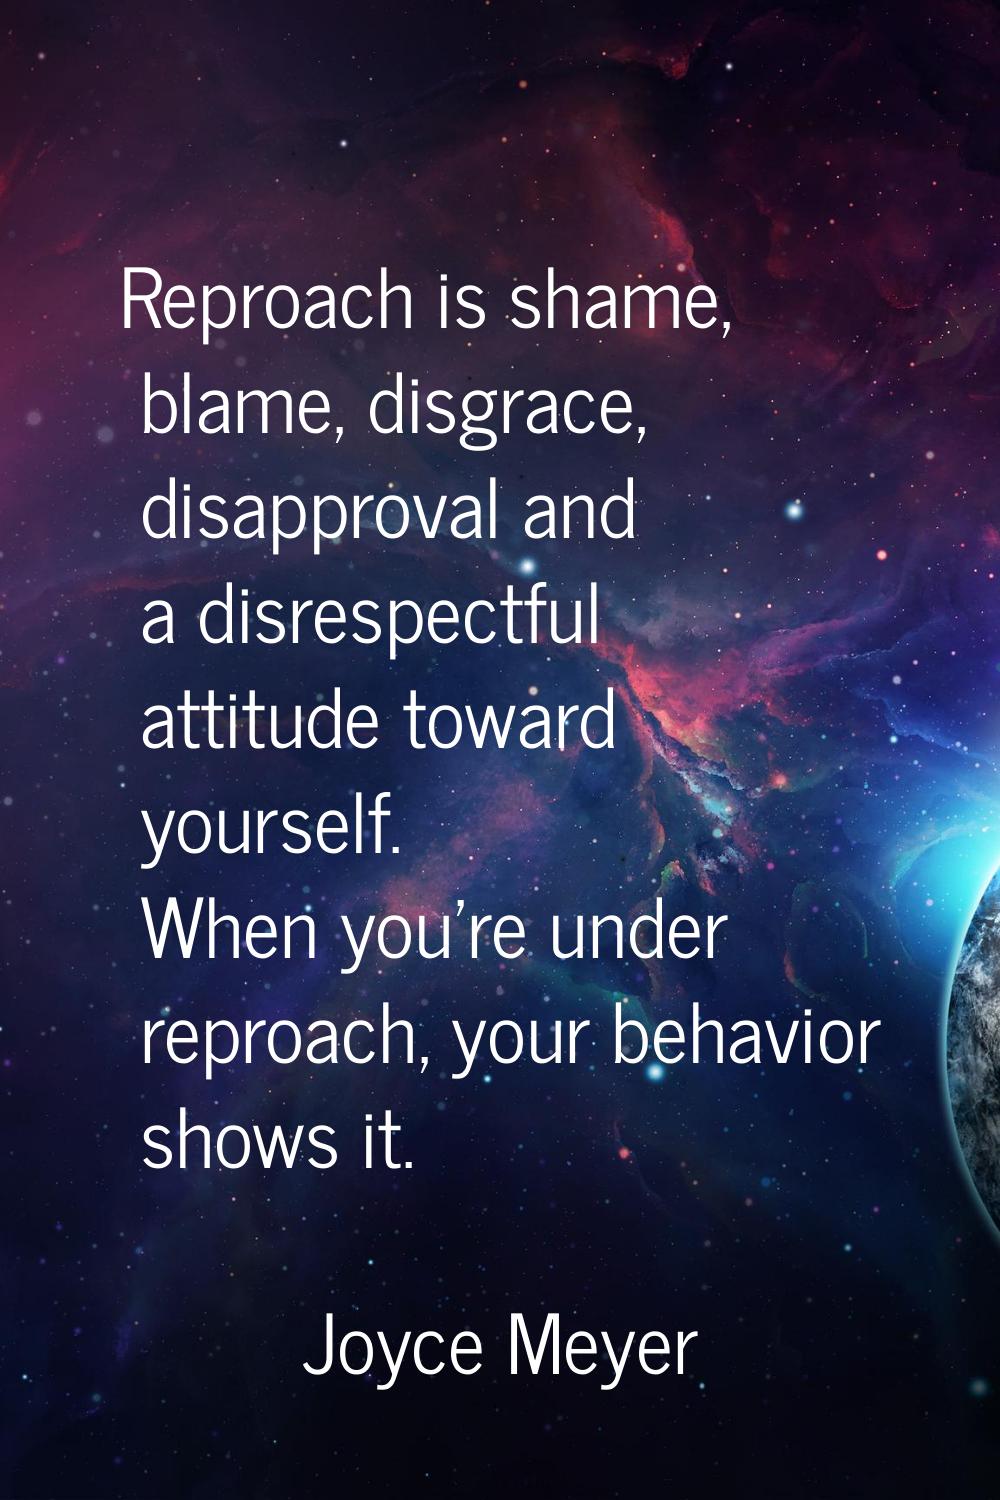 Reproach is shame, blame, disgrace, disapproval and a disrespectful attitude toward yourself. When 